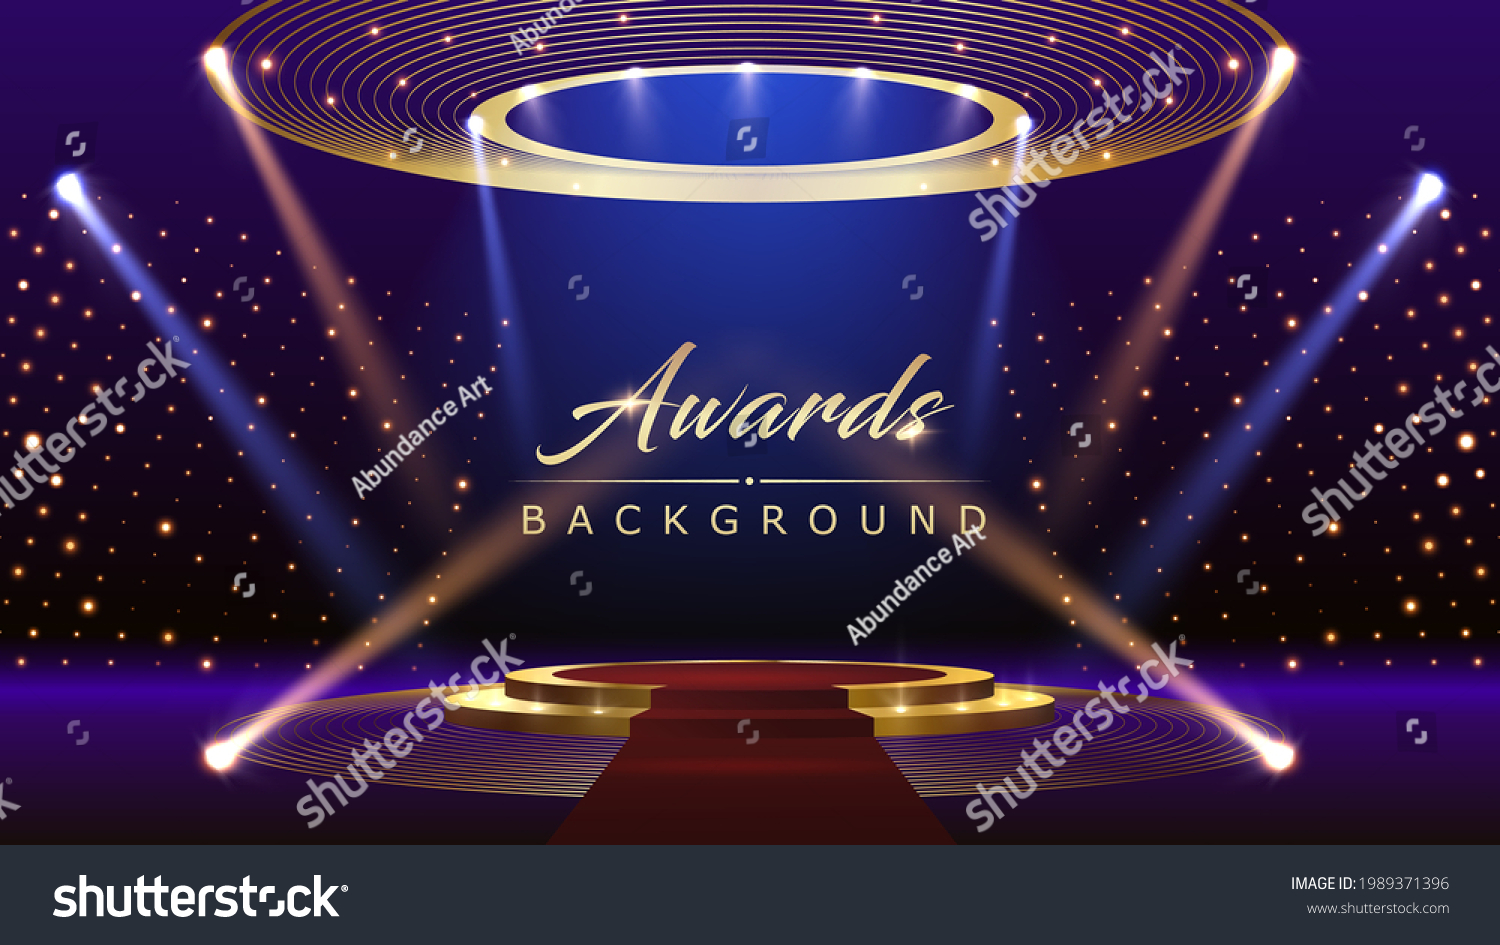 Blue Pink Red Golden Stage Spotlights Awards Graphics Background Celebration. Red Carpet Entry Show. Entertainment Hollywood Bollywood Template Design. Awards Background Theater Drama Steps Floor.  #1989371396